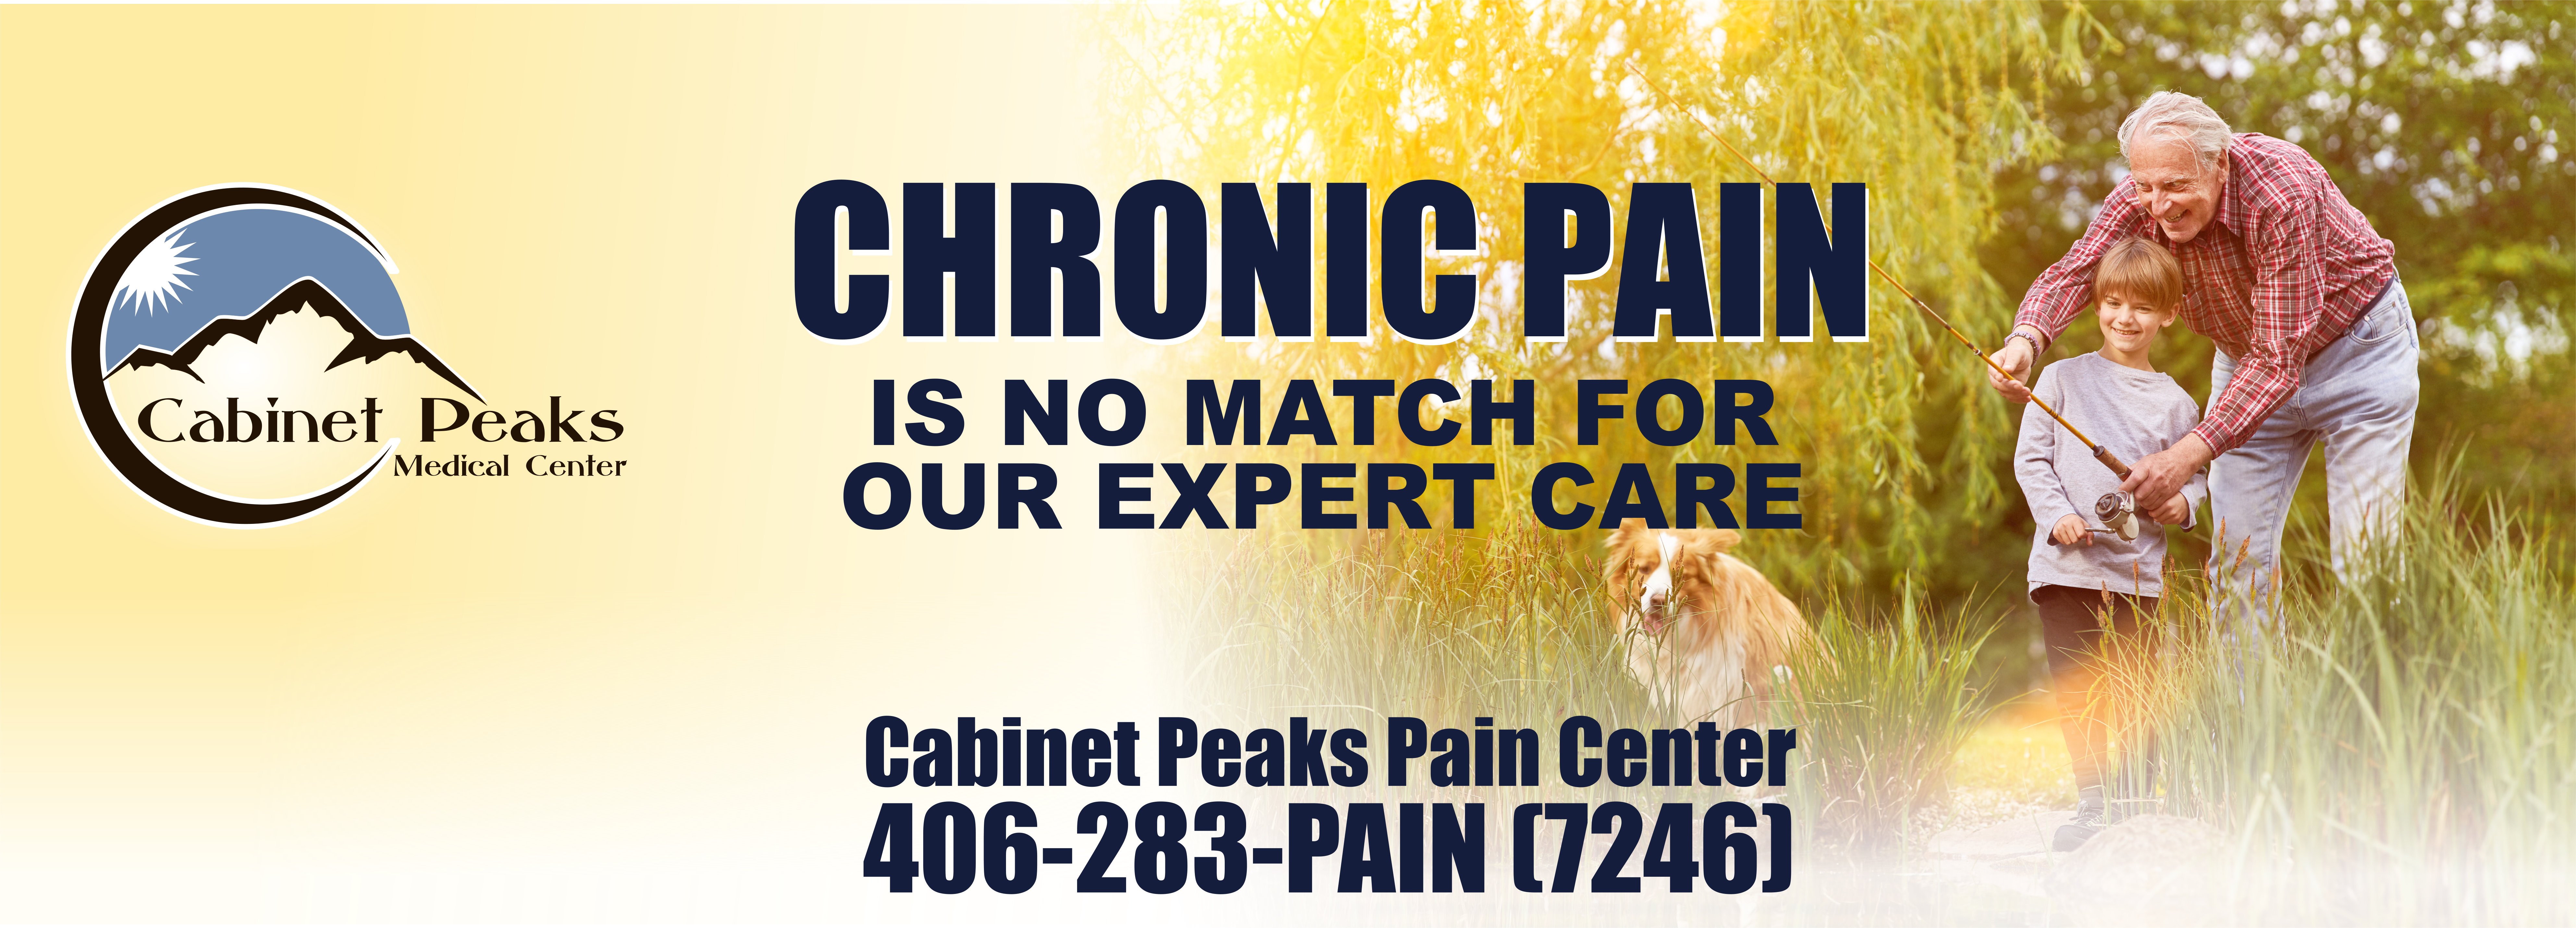 CHRONIC PAIN US NO MATCH FOR OUR EXPERT CARE

Cabinet Peaks Pain Center
(406)-283-PAIN(7246)


Cabinet Peaks Medical Center